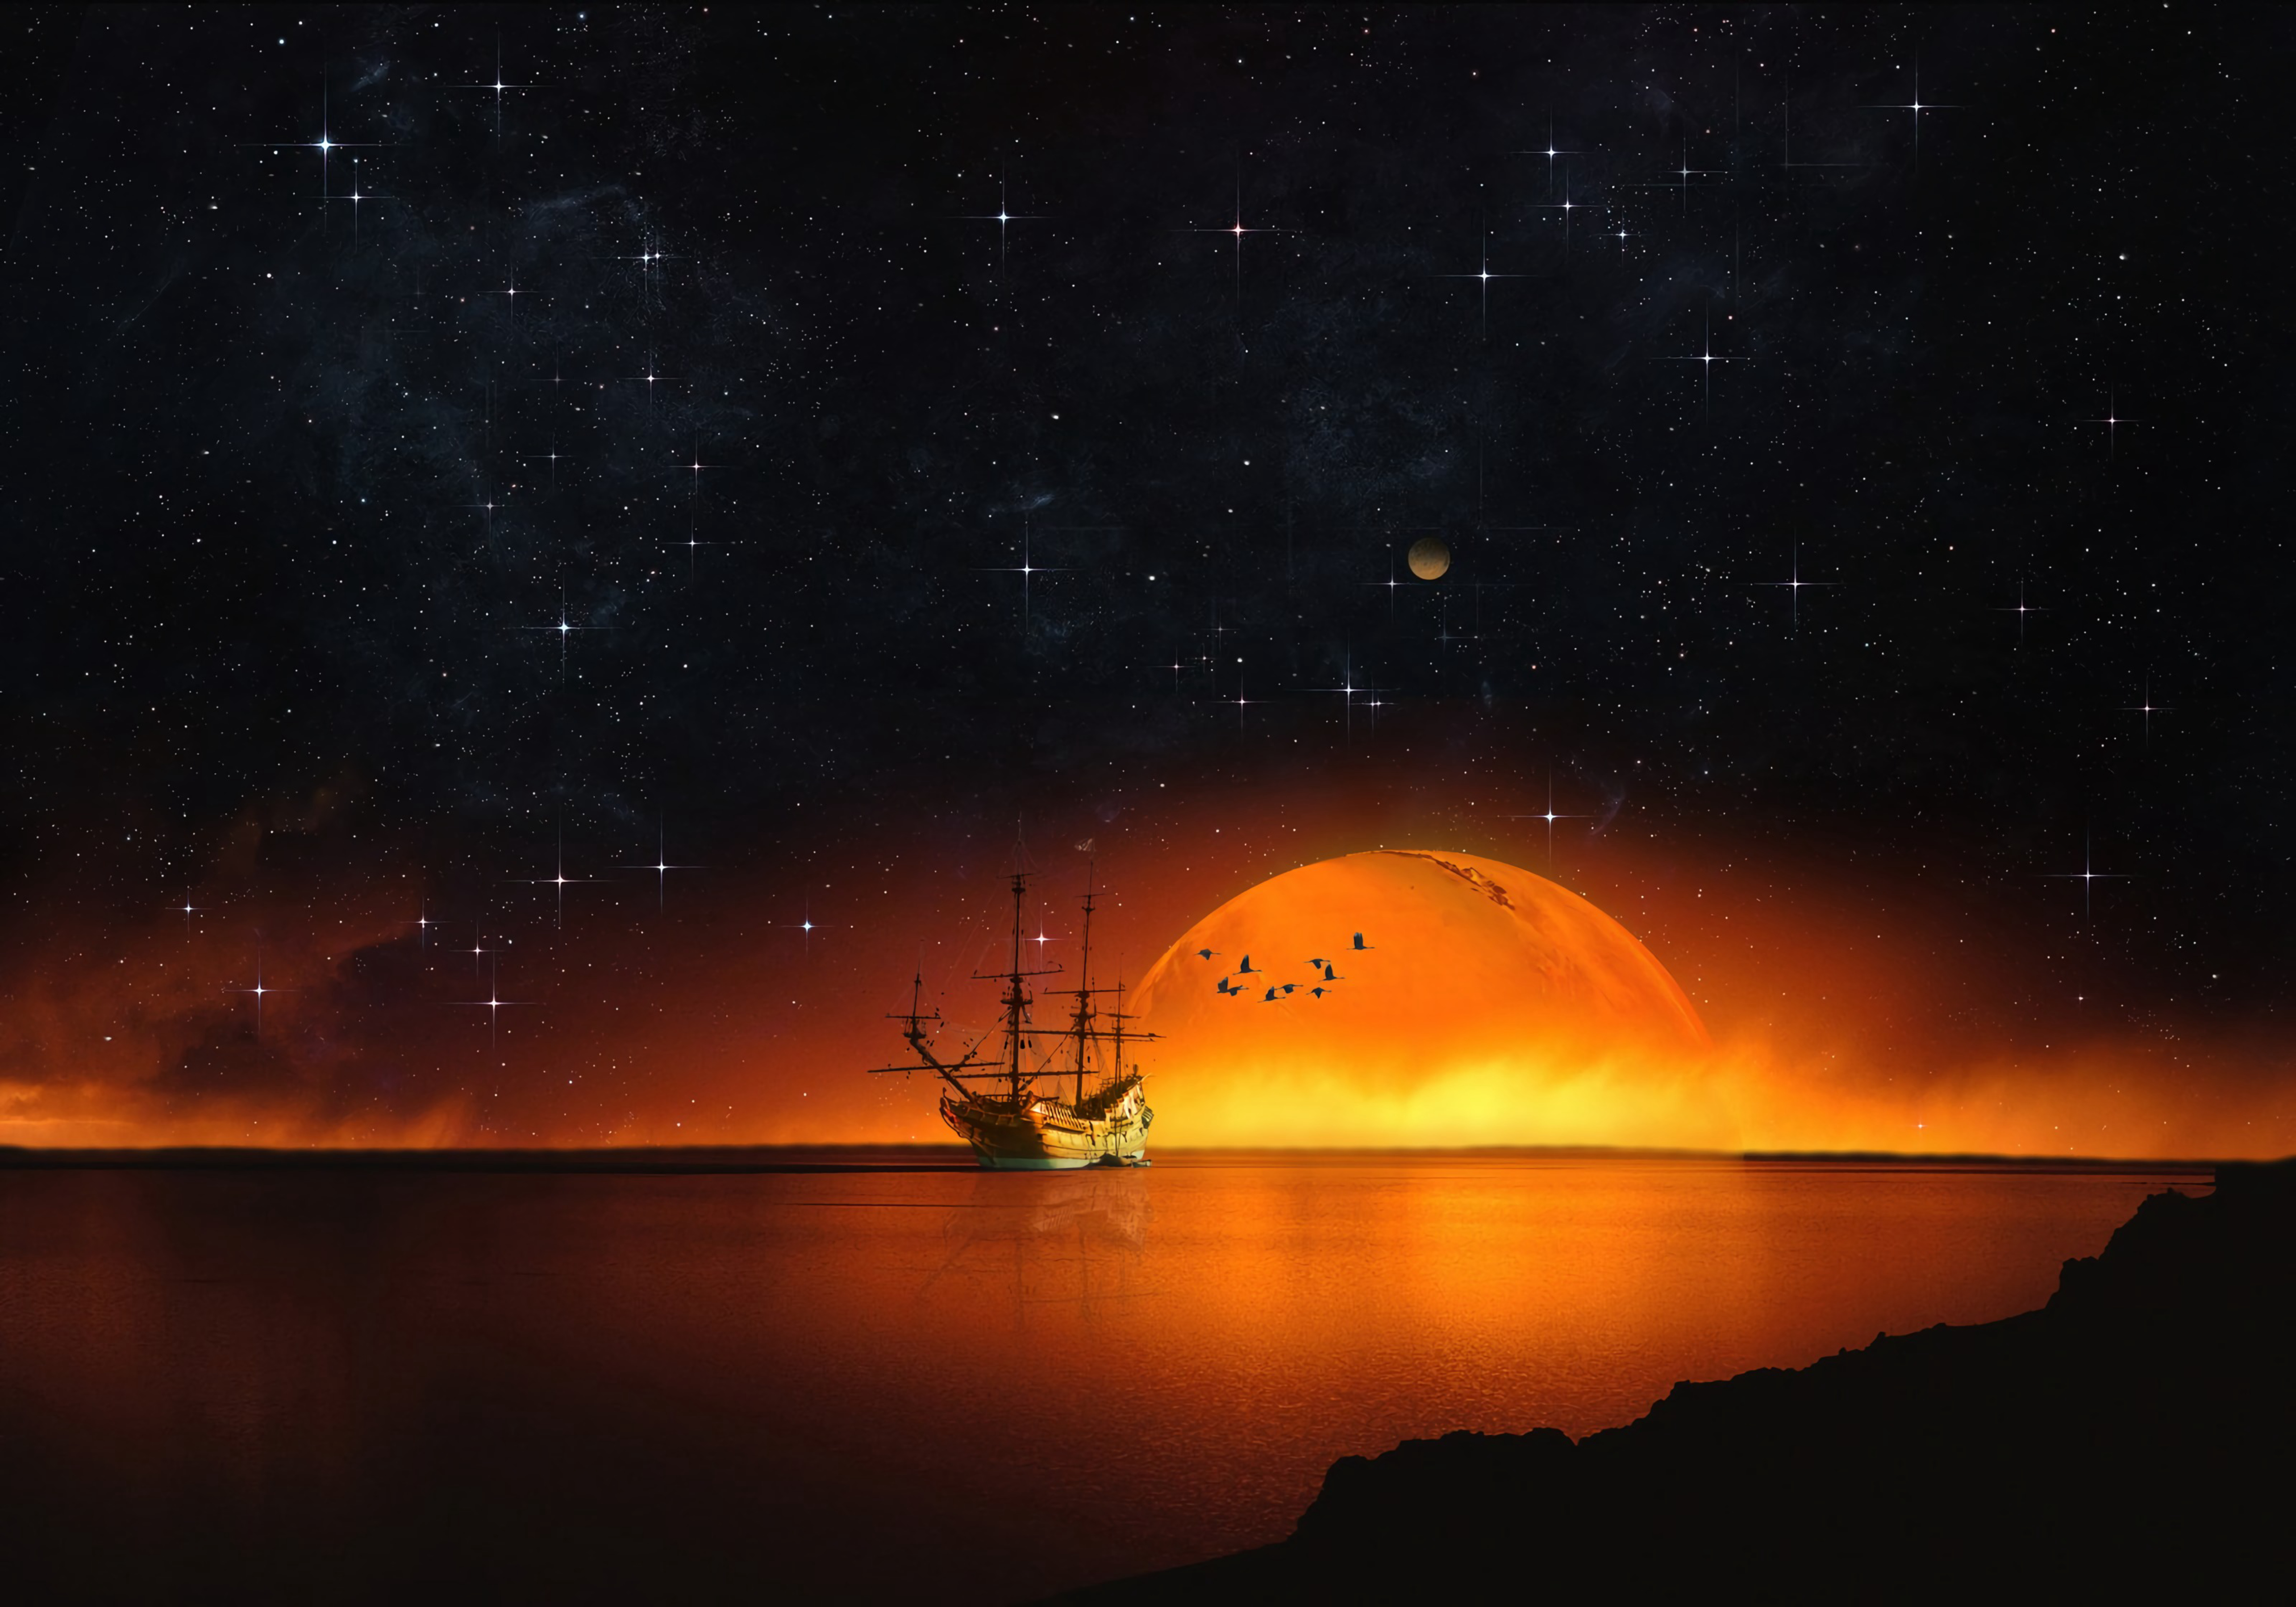 night, ship, photoshop, miscellanea, miscellaneous, sea, starry sky cell phone wallpapers